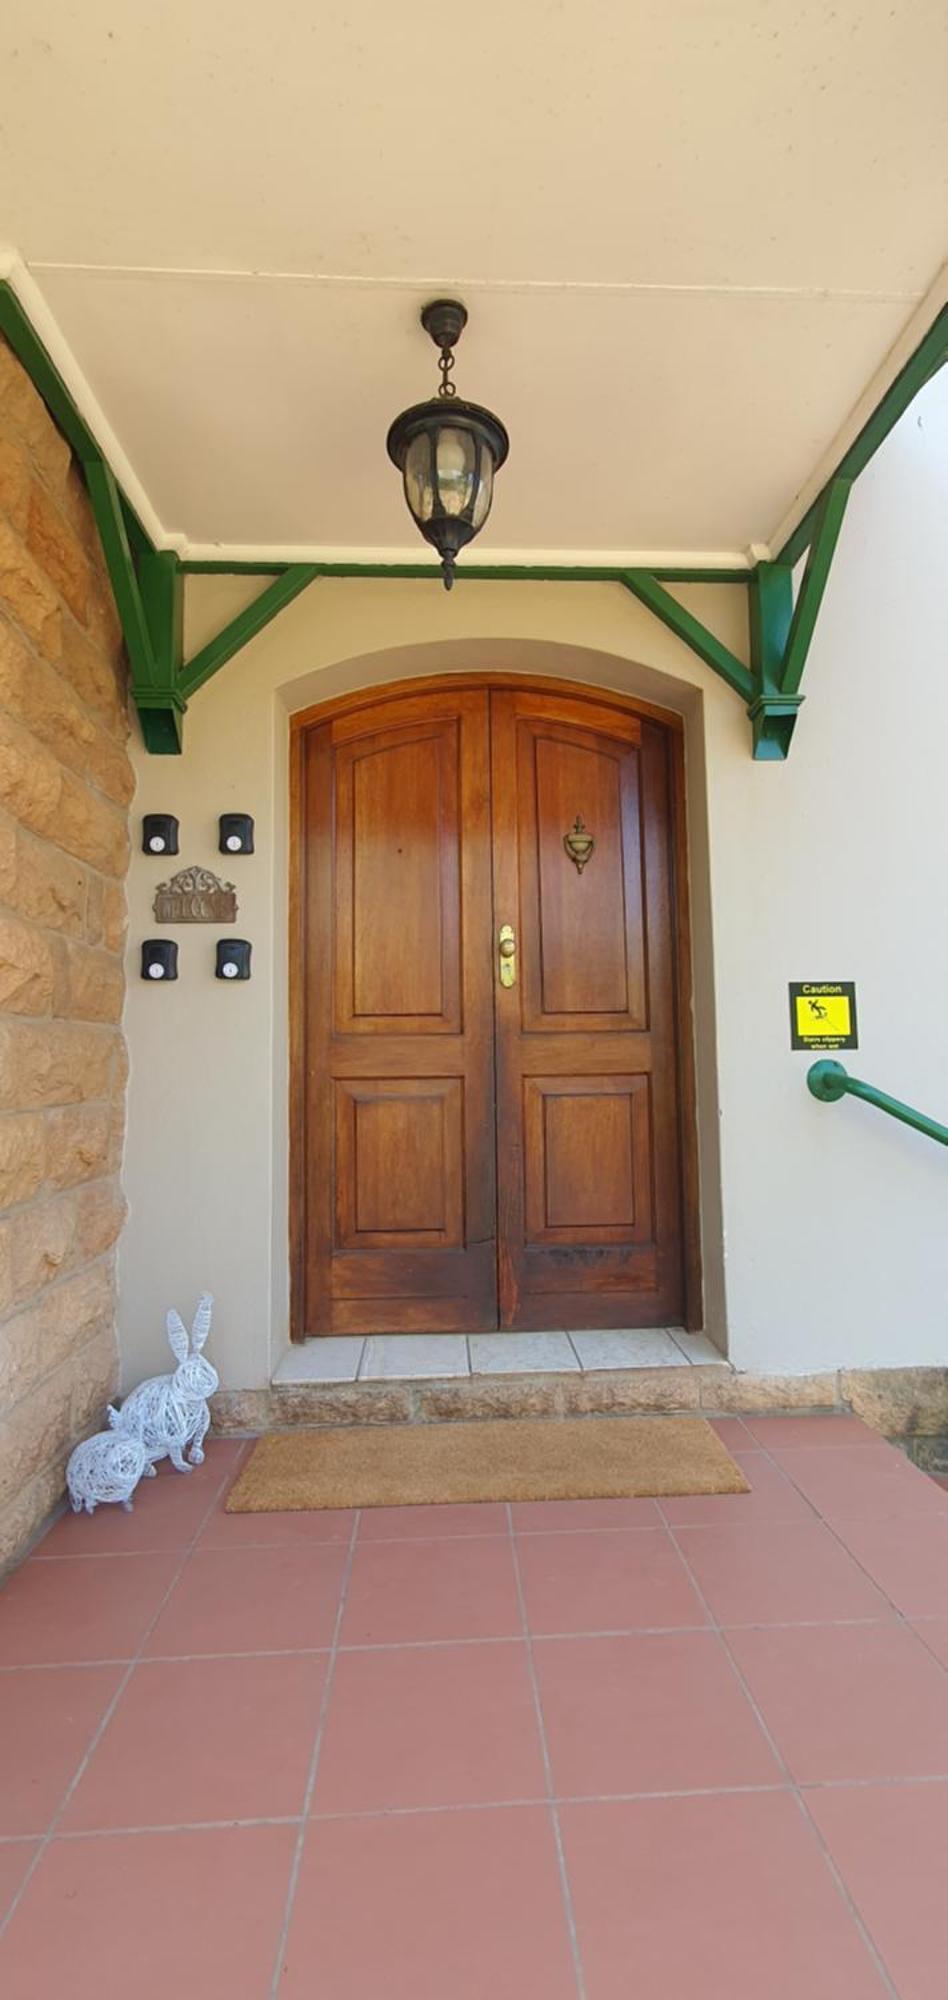 The Browns' - Luxury Suites Dullstroom Exterior photo